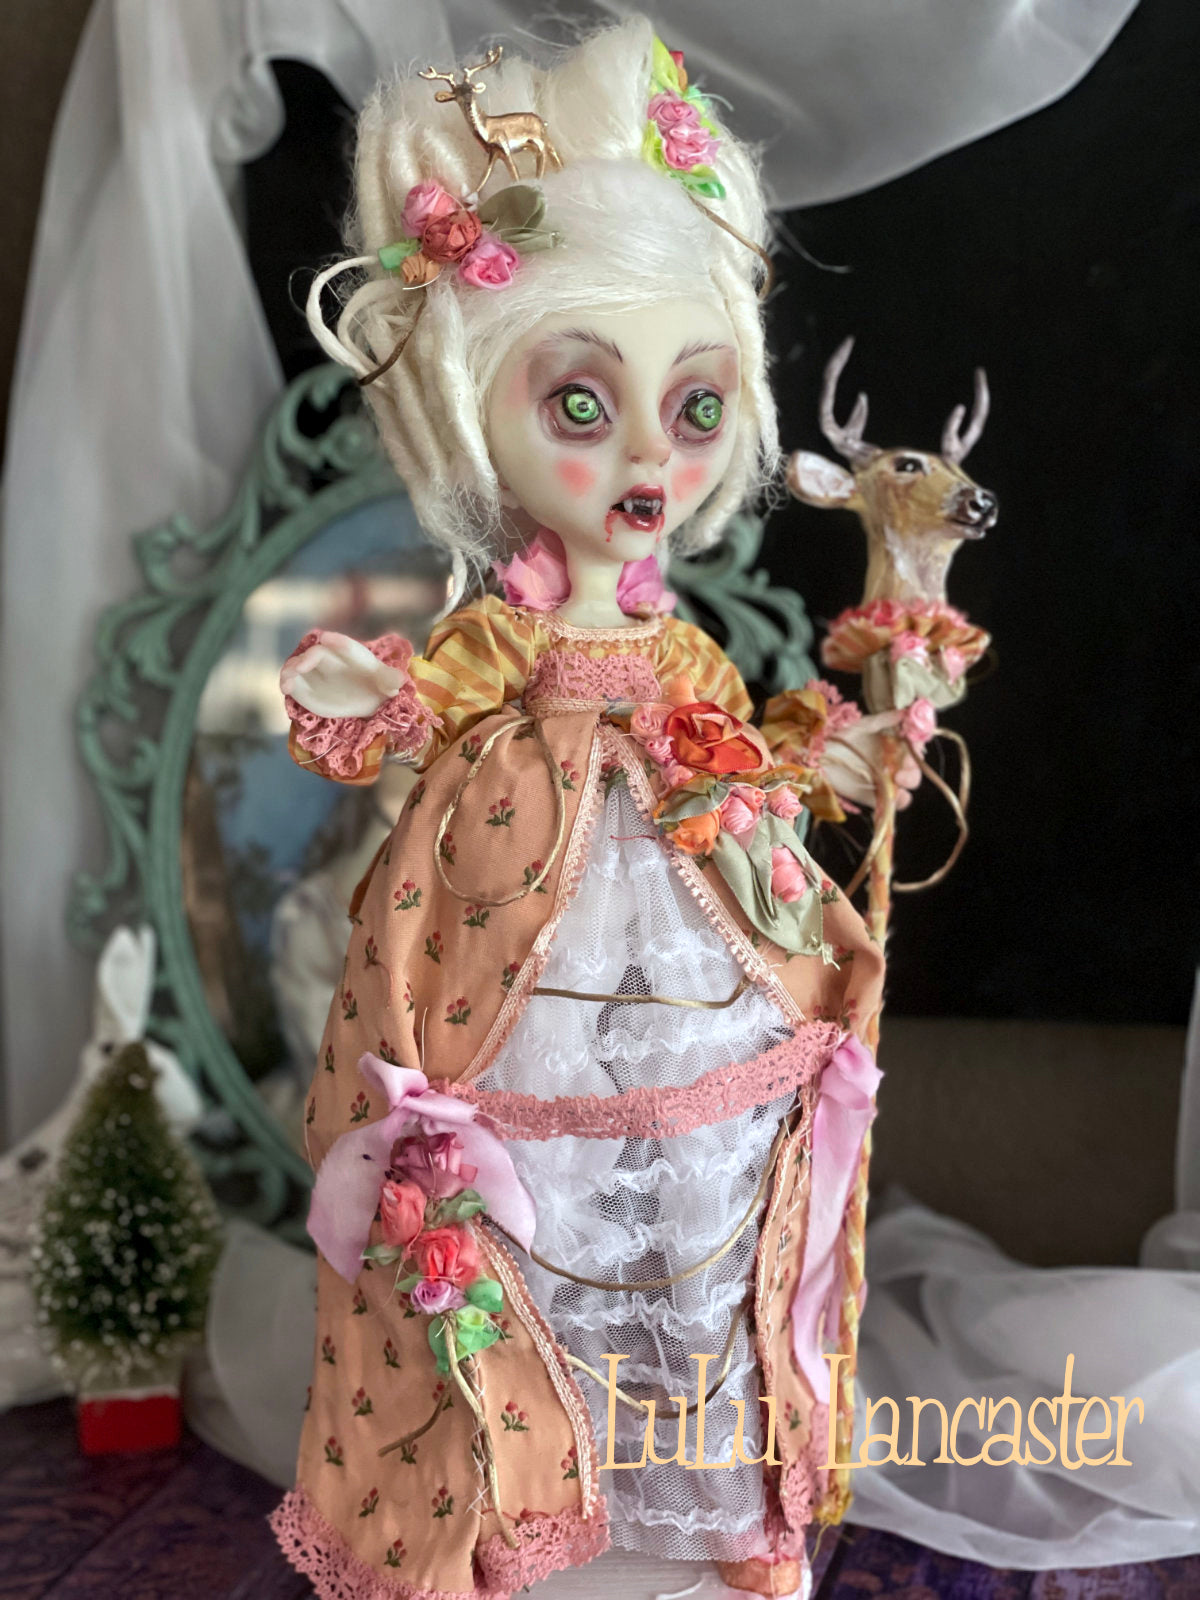 Aphra the rococo Vampire Art Doll LuLu Lancaster ~Ominous III, Hinge Artist Collective Group show